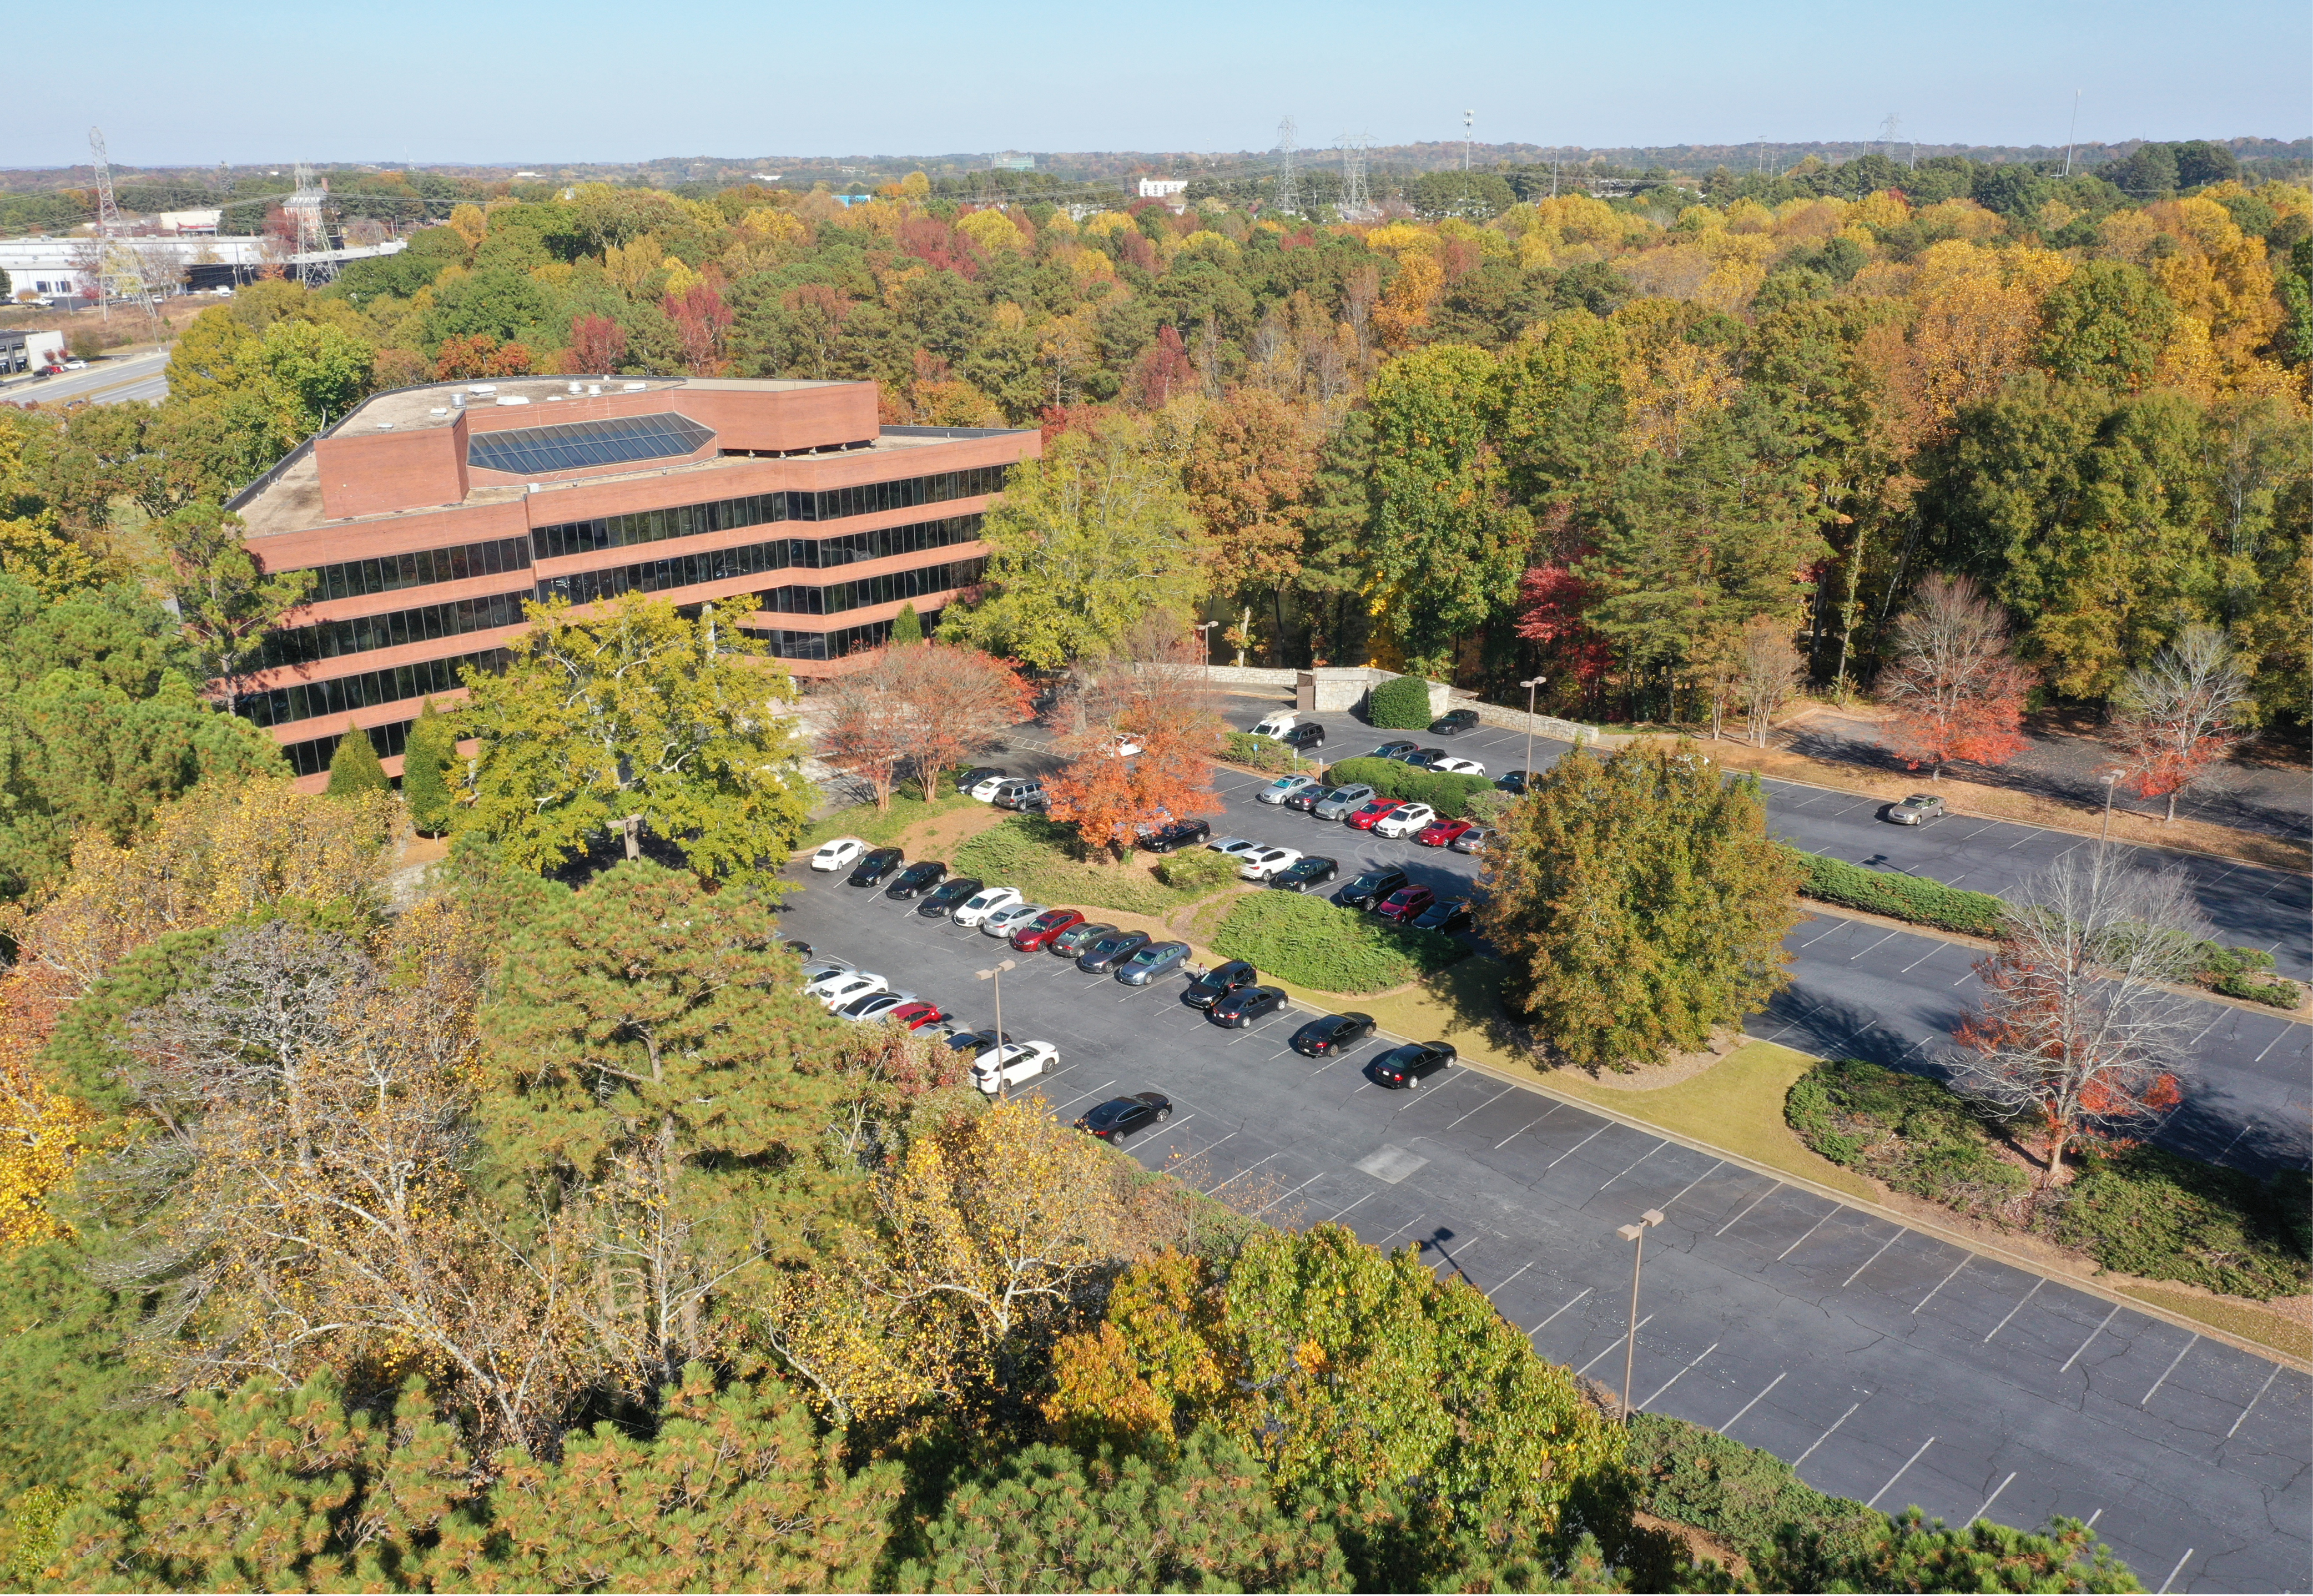 Avison Young markets 101,105 SF office building in Norcross/Peachtree Corners submarket